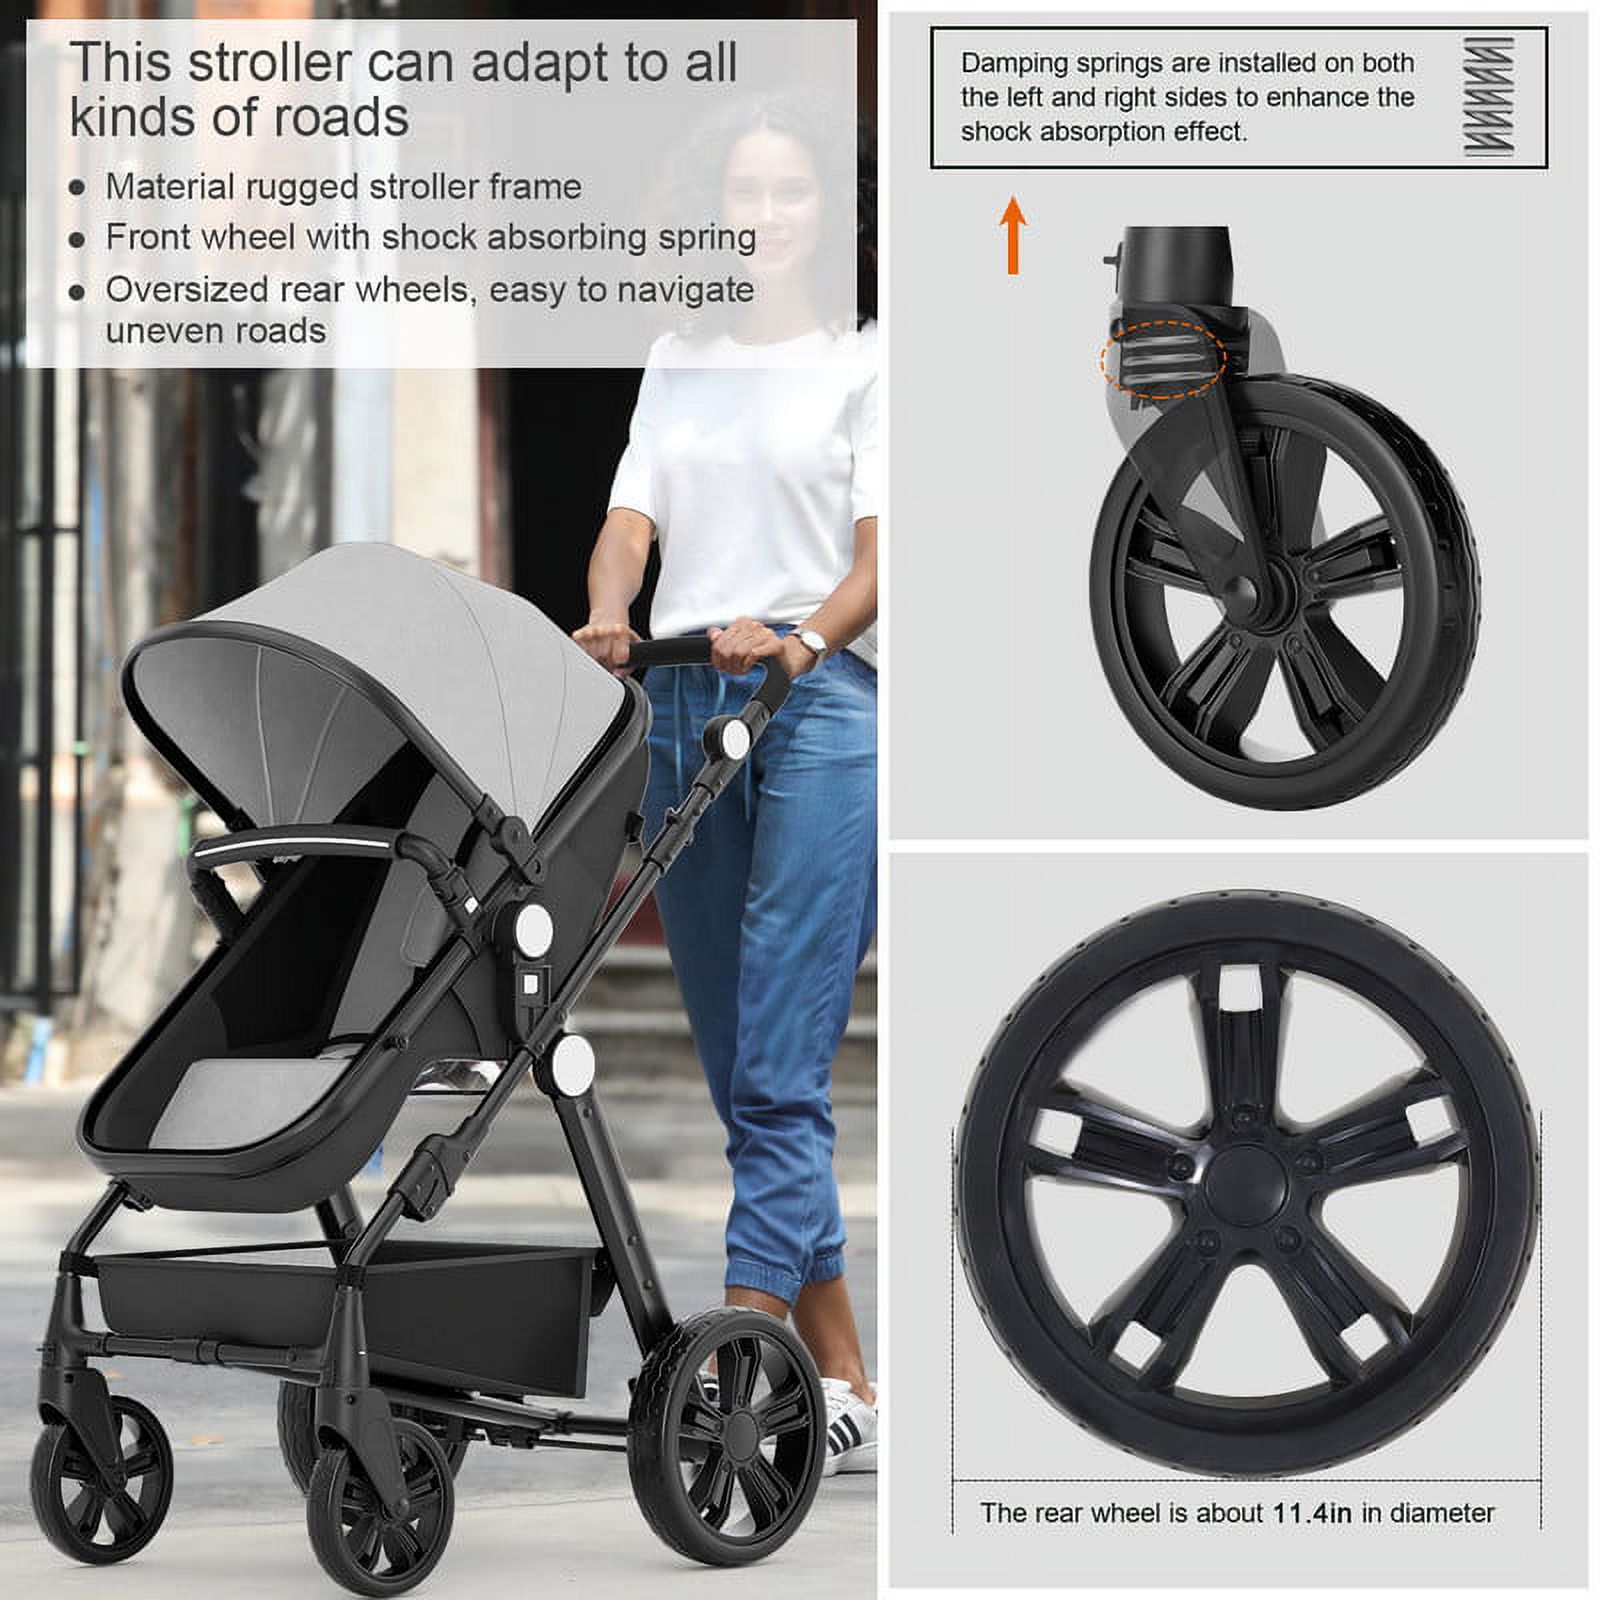 Cynebaby Foldable Baby Newborn Stroller for 0-36 Months Old Babies, Gray - image 2 of 10